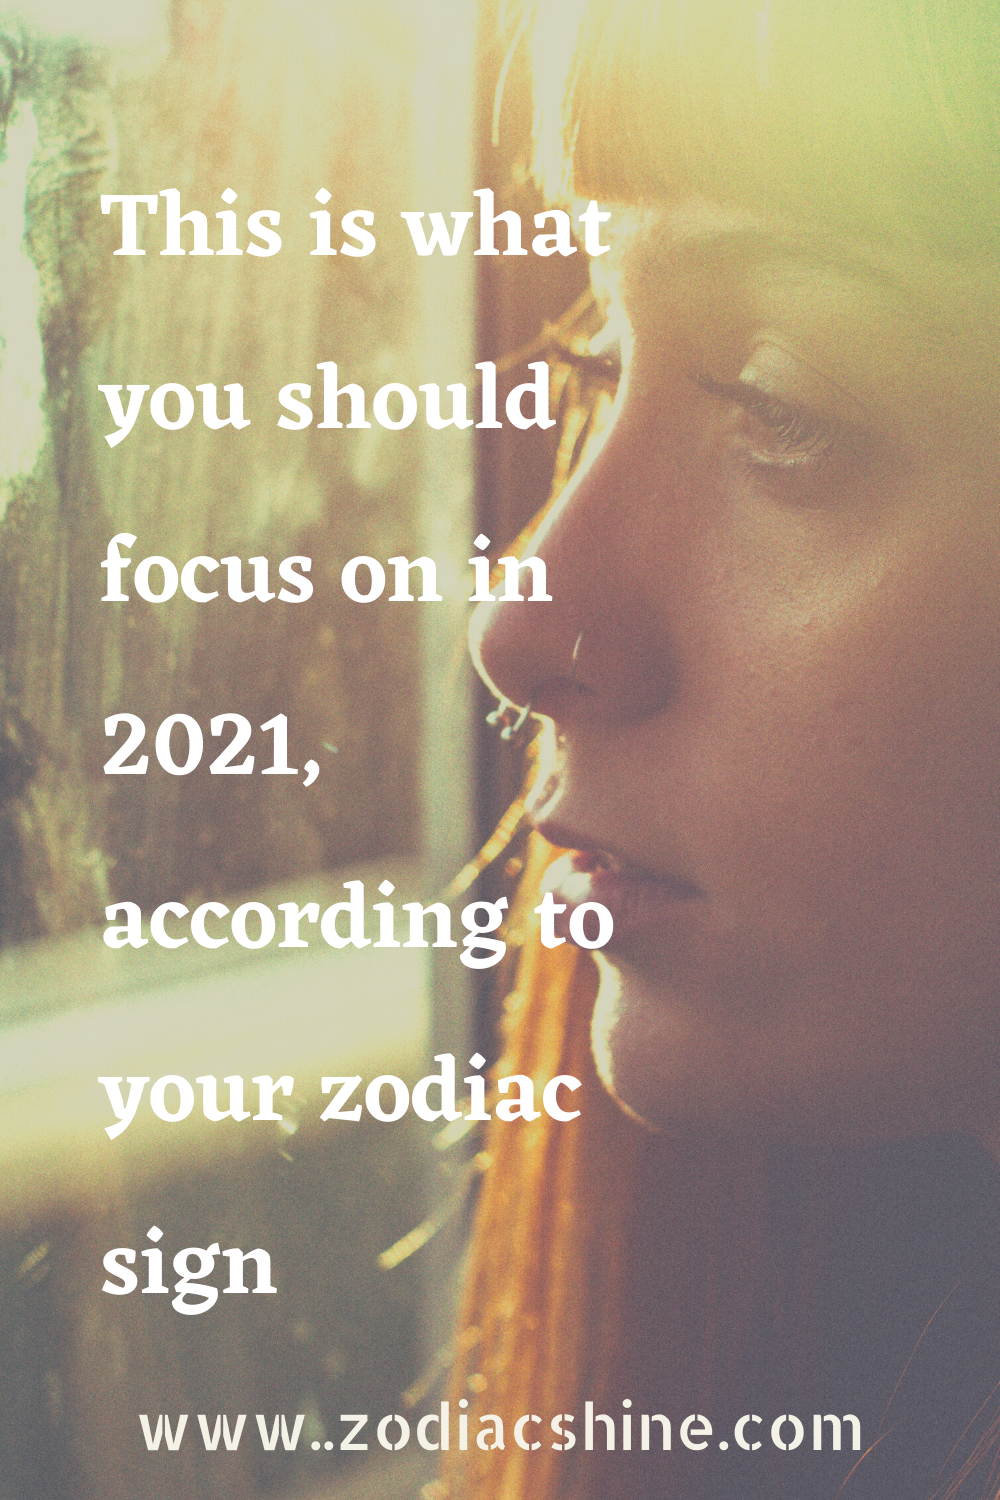 This is what you should focus on in 2021, according to your zodiac sign